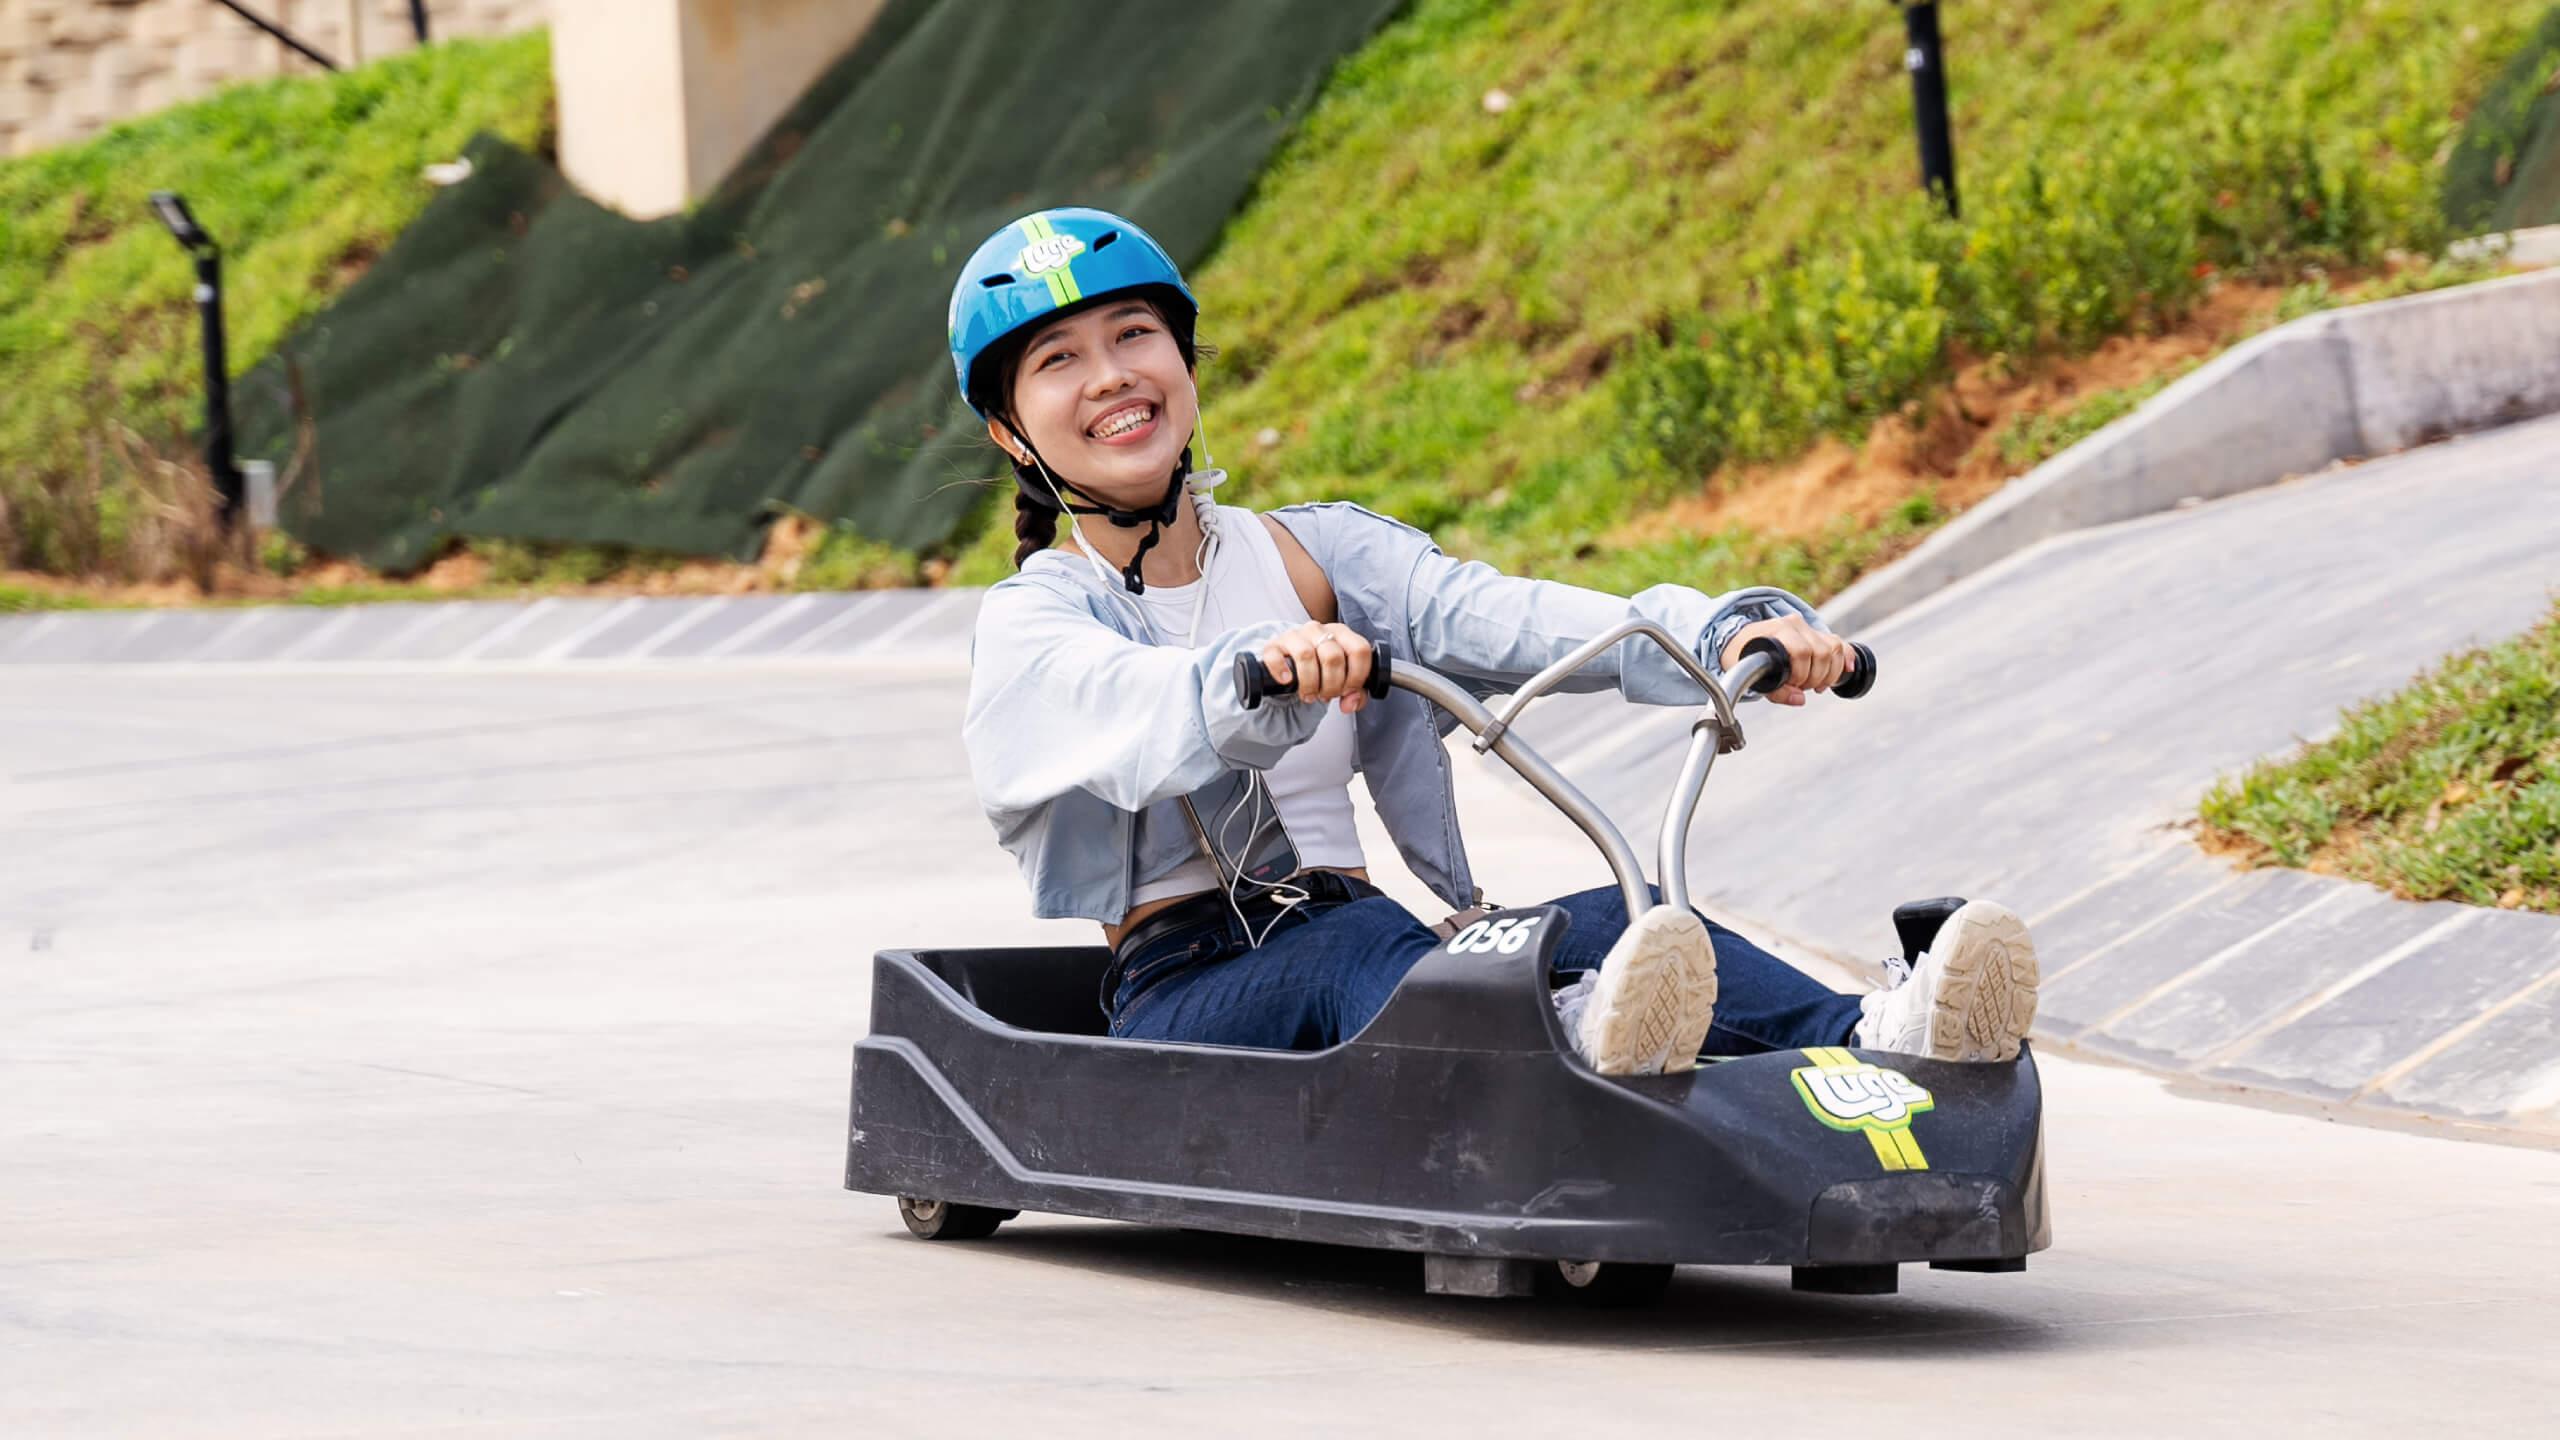 A young lady smiles as she poses for a photo in her Luge cart.